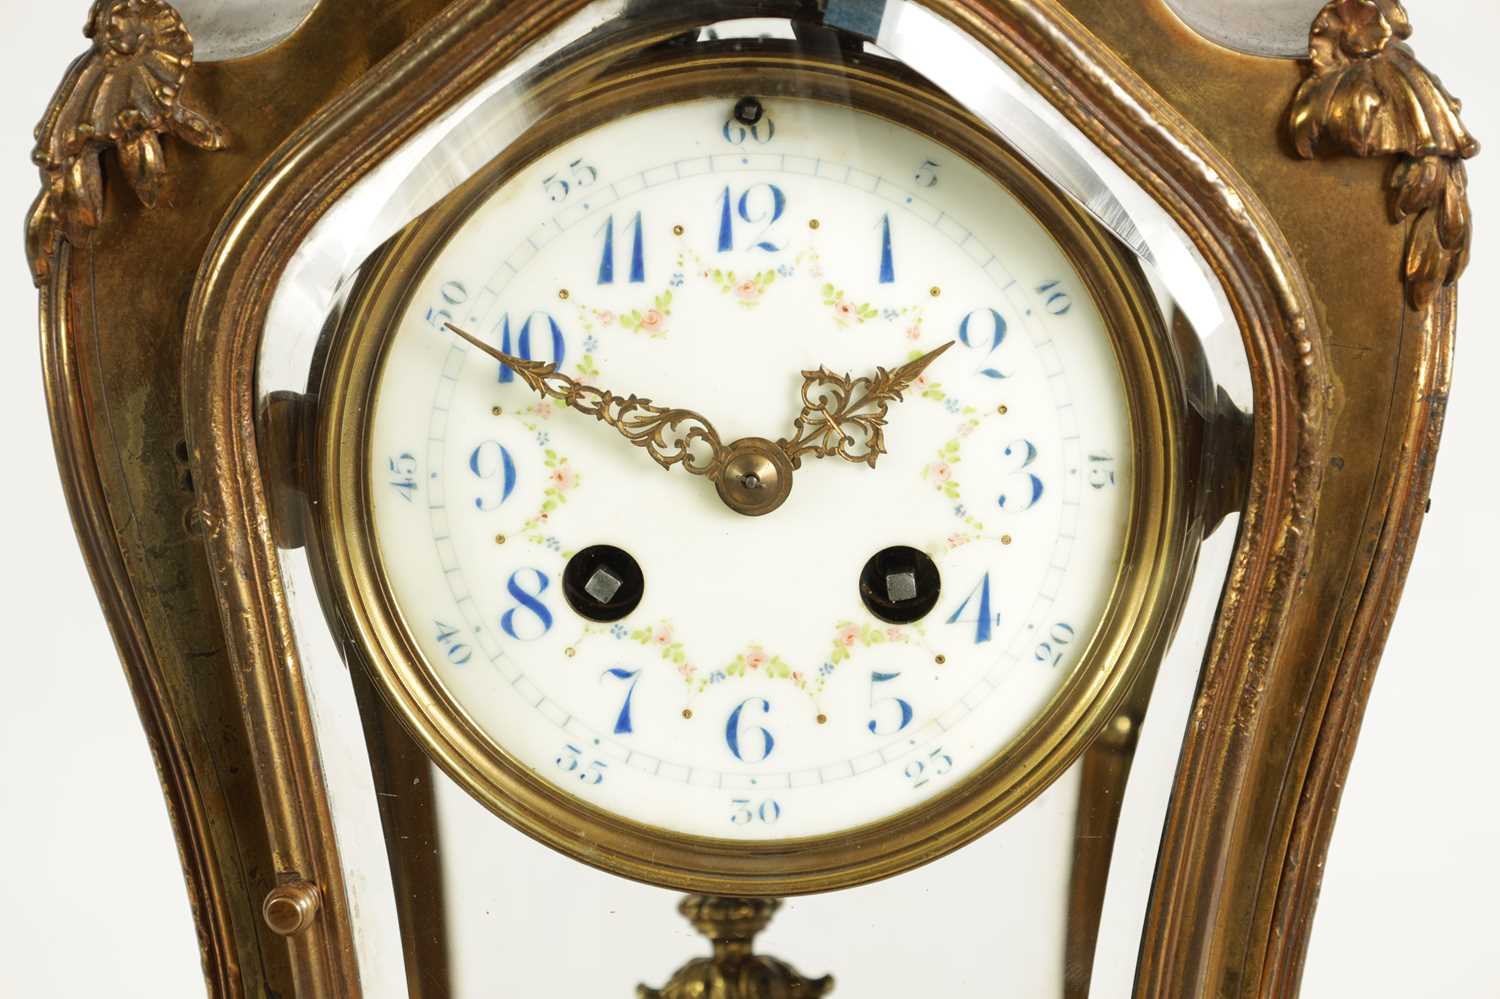 A LATE 19TH CENTURY FRENCH ART NOUVEAU GILT BRASS FOUR GLASS MANTEL CLOCK - Image 4 of 13